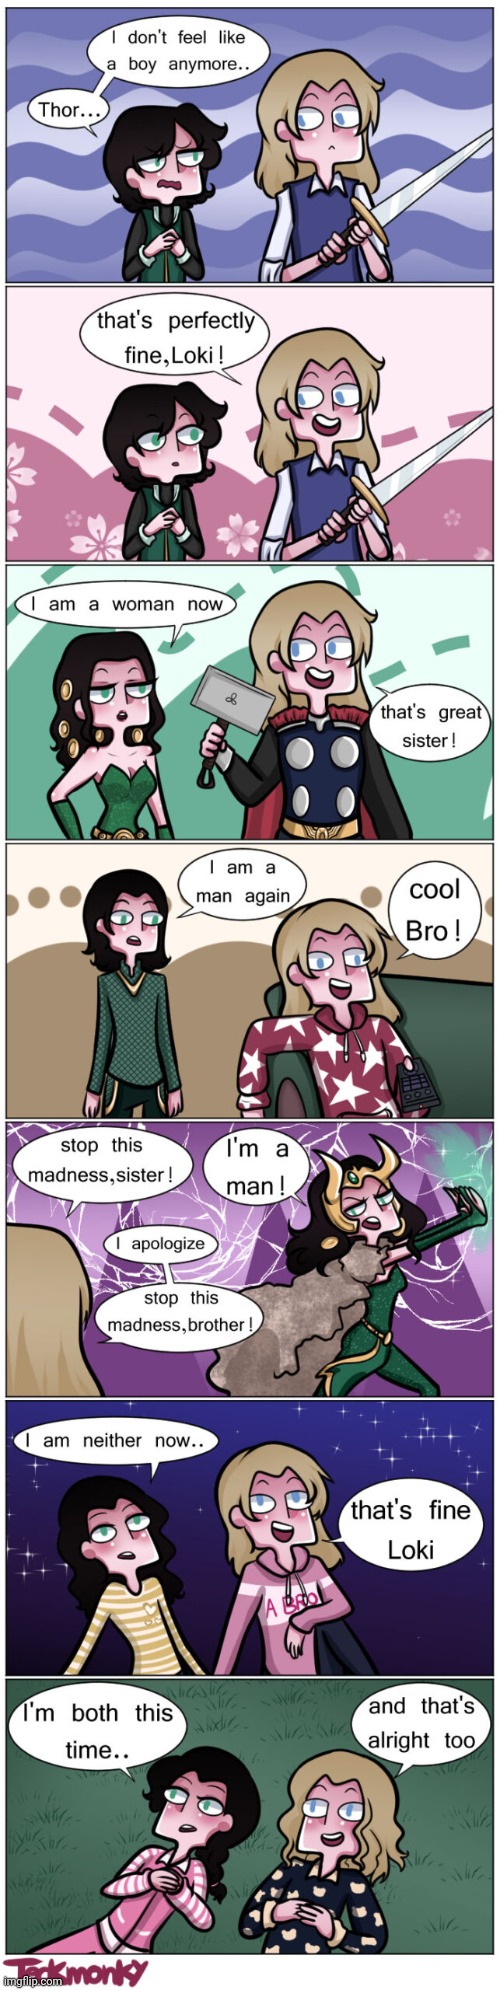 Loki has been the mother of many children. | image tagged in comics/cartoons,thor,gender fluid,lgbt,mythology,acceptance | made w/ Imgflip meme maker